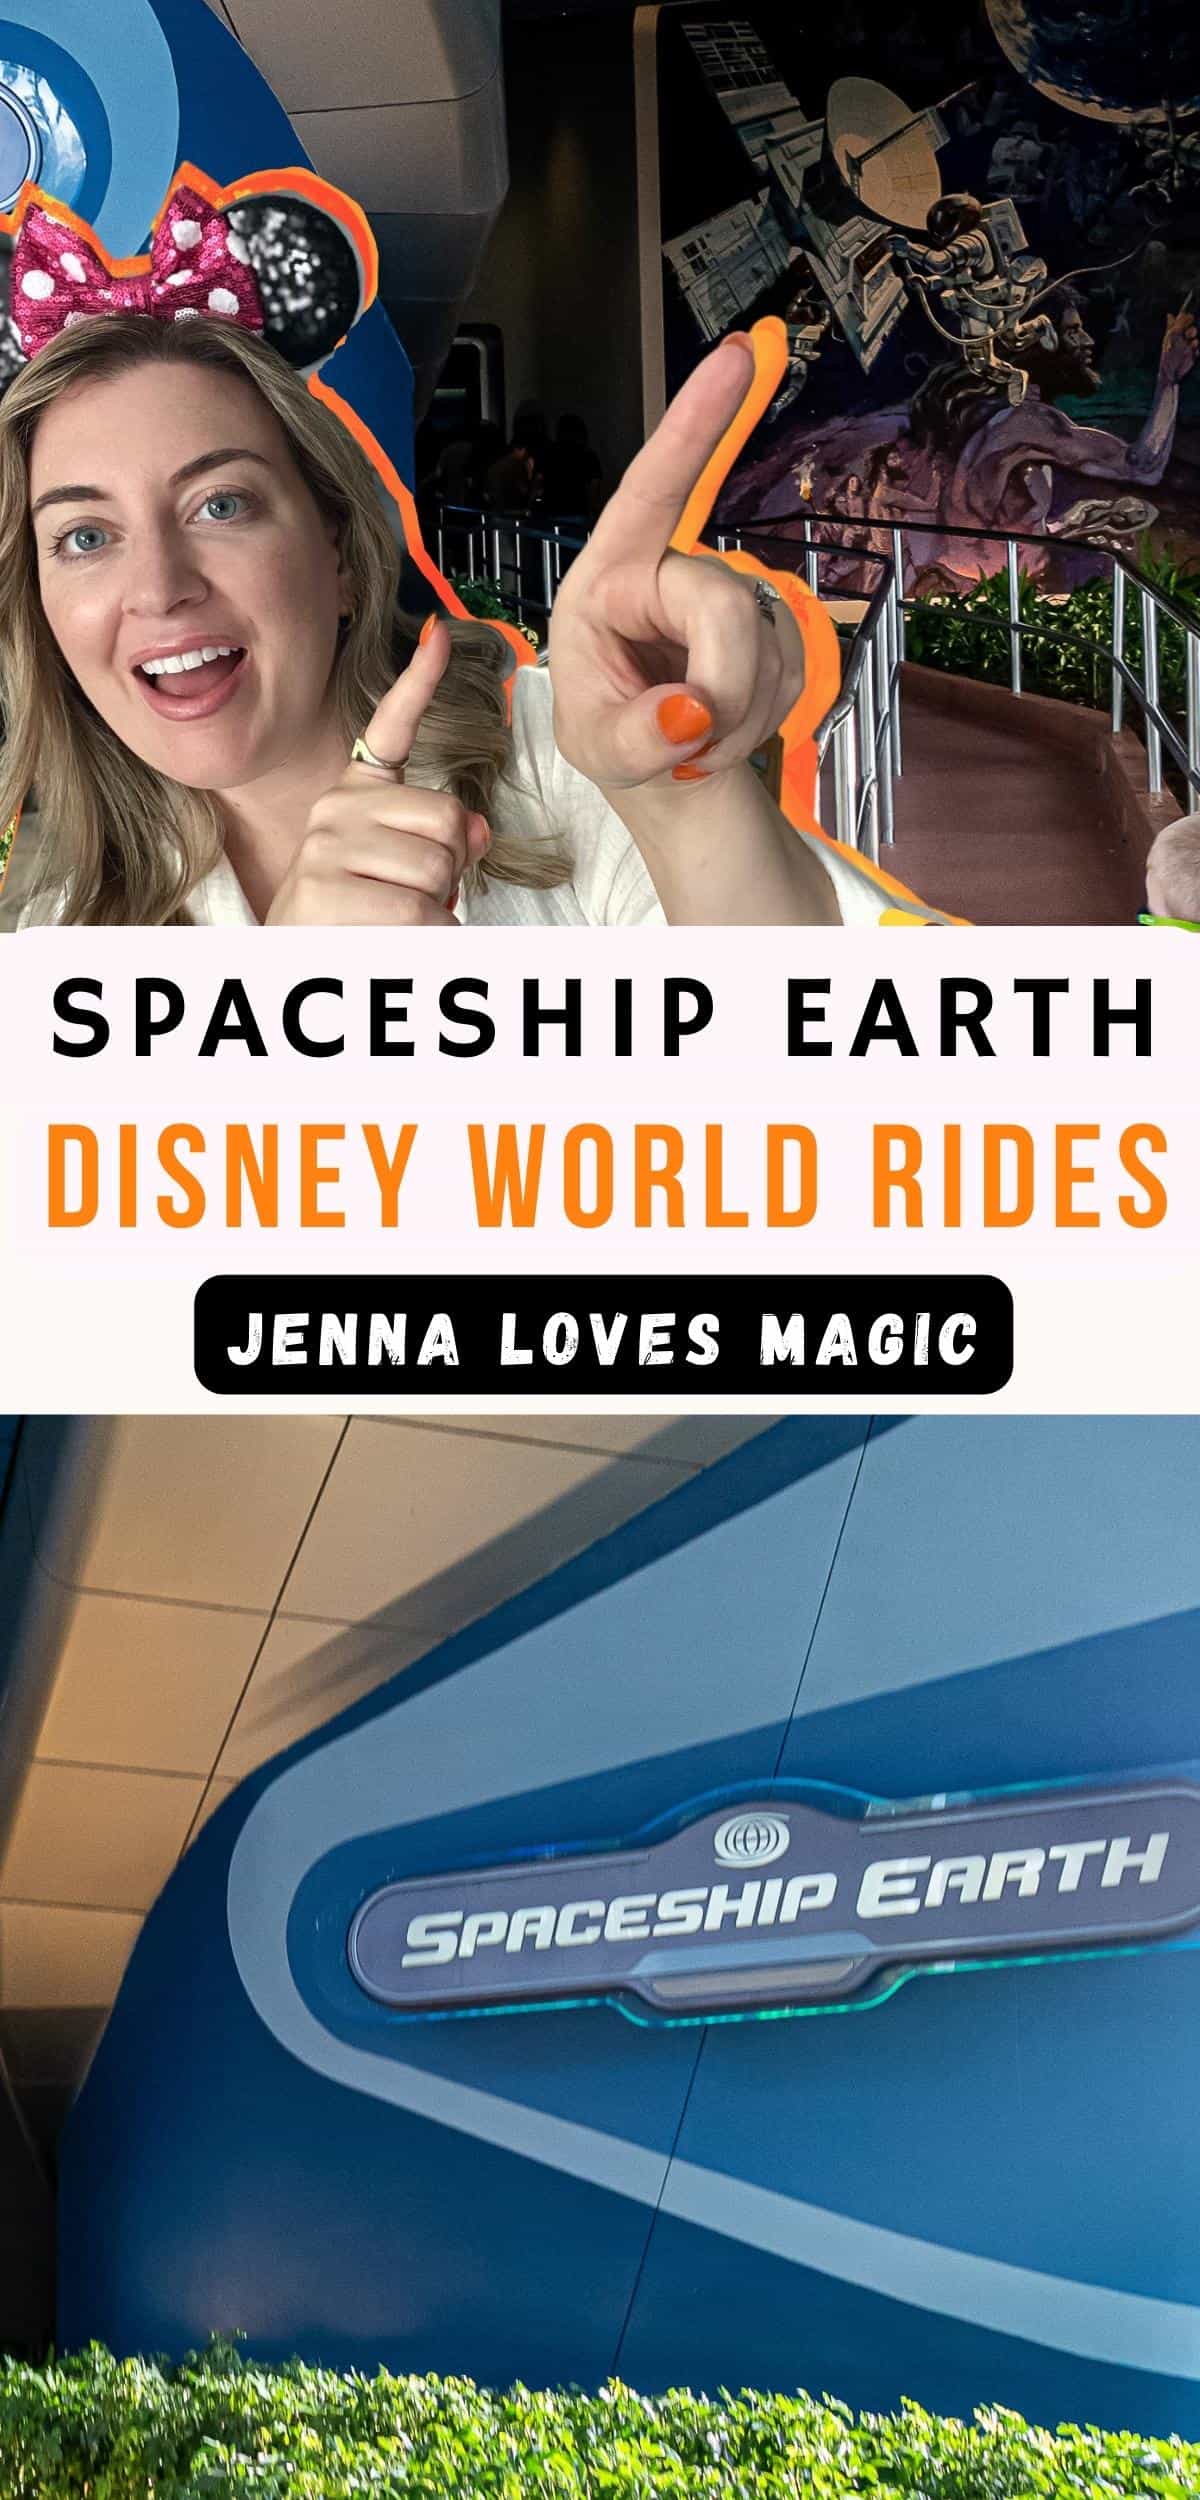 Disney World Epcot Spaceship Earth Ride photos with text overlay and logo for Jenna Loves Magic